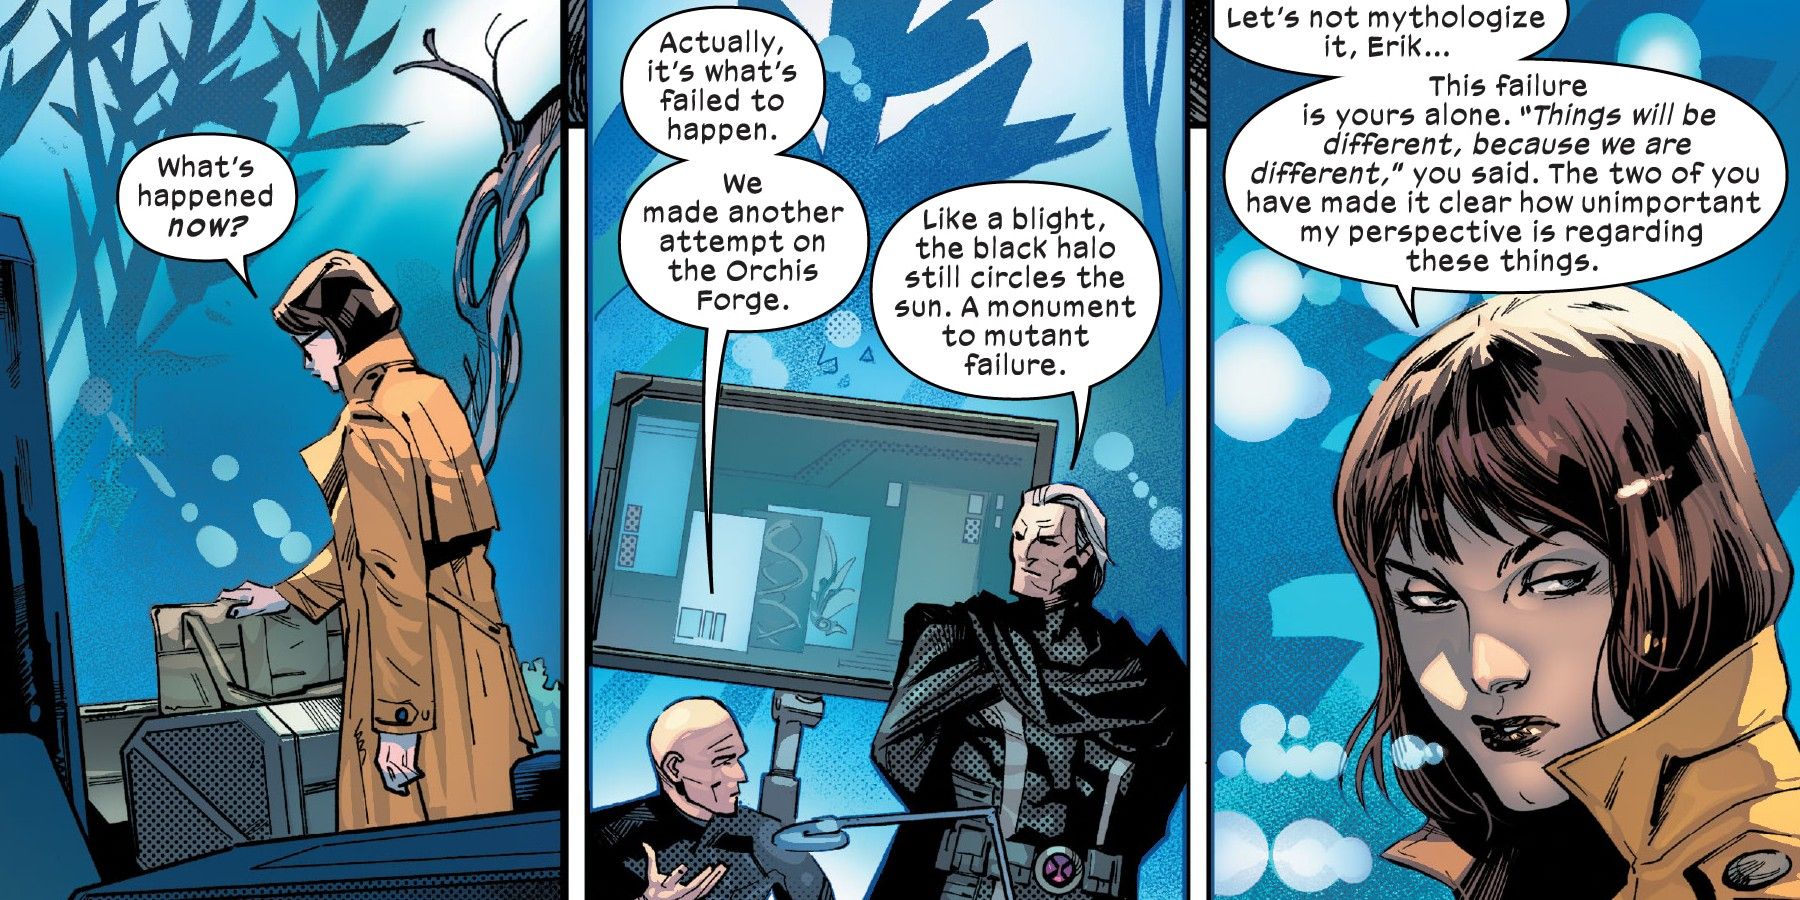 Moira X speaking to Magneto and Professor X in Inferno #1